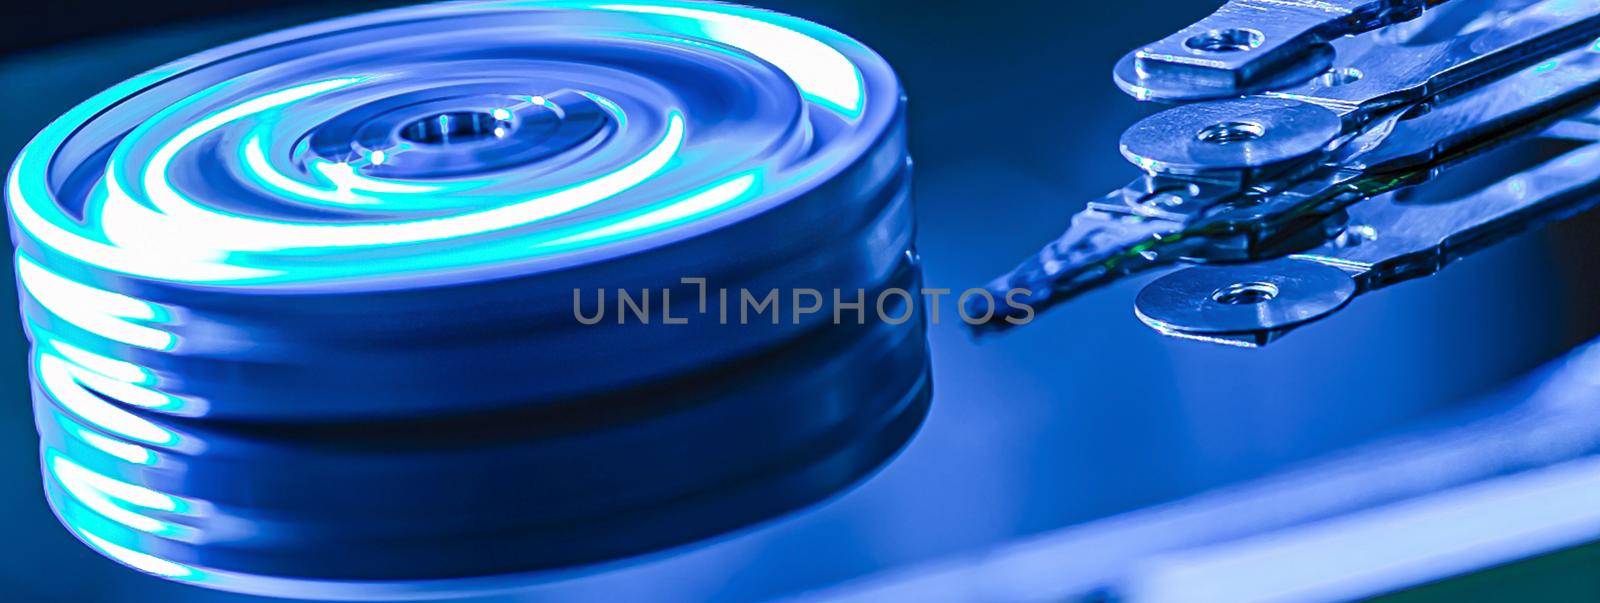 Hard disk detail, banner image with copy space